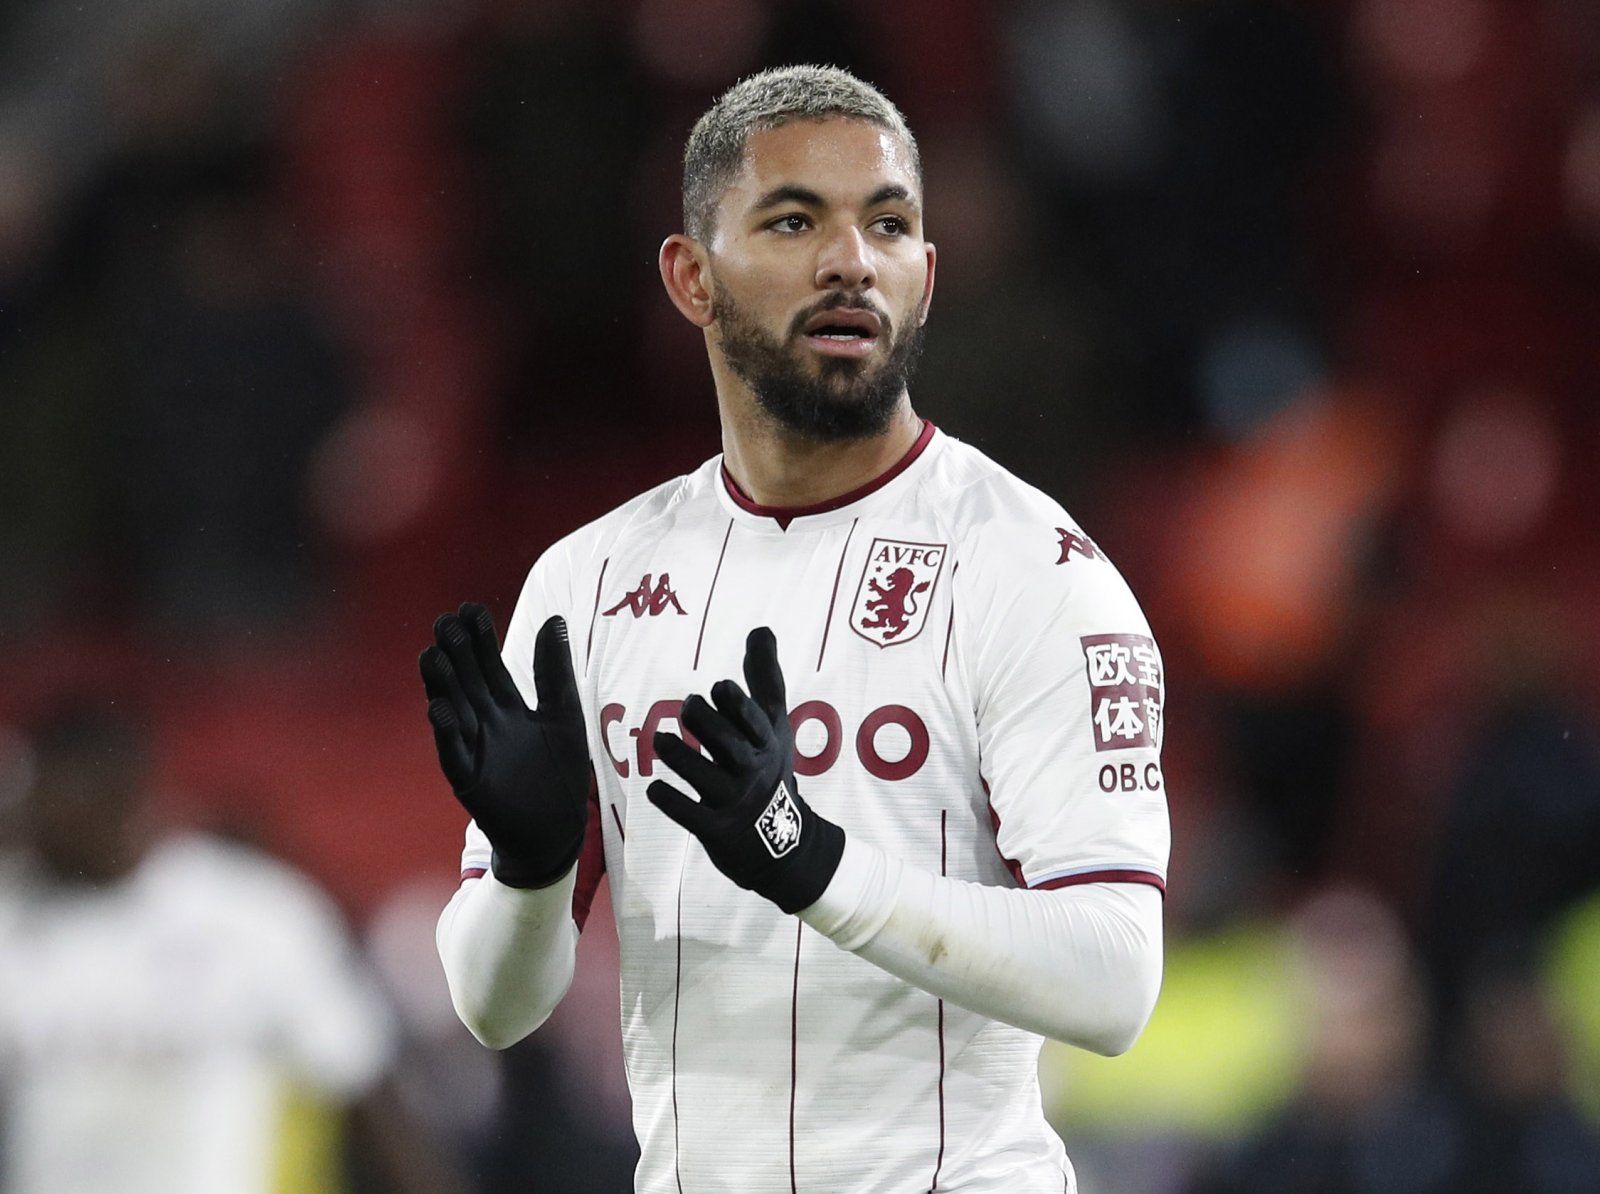 Liverpool: Reds have ‘made an offer’ for Douglas Luiz -Liverpool News